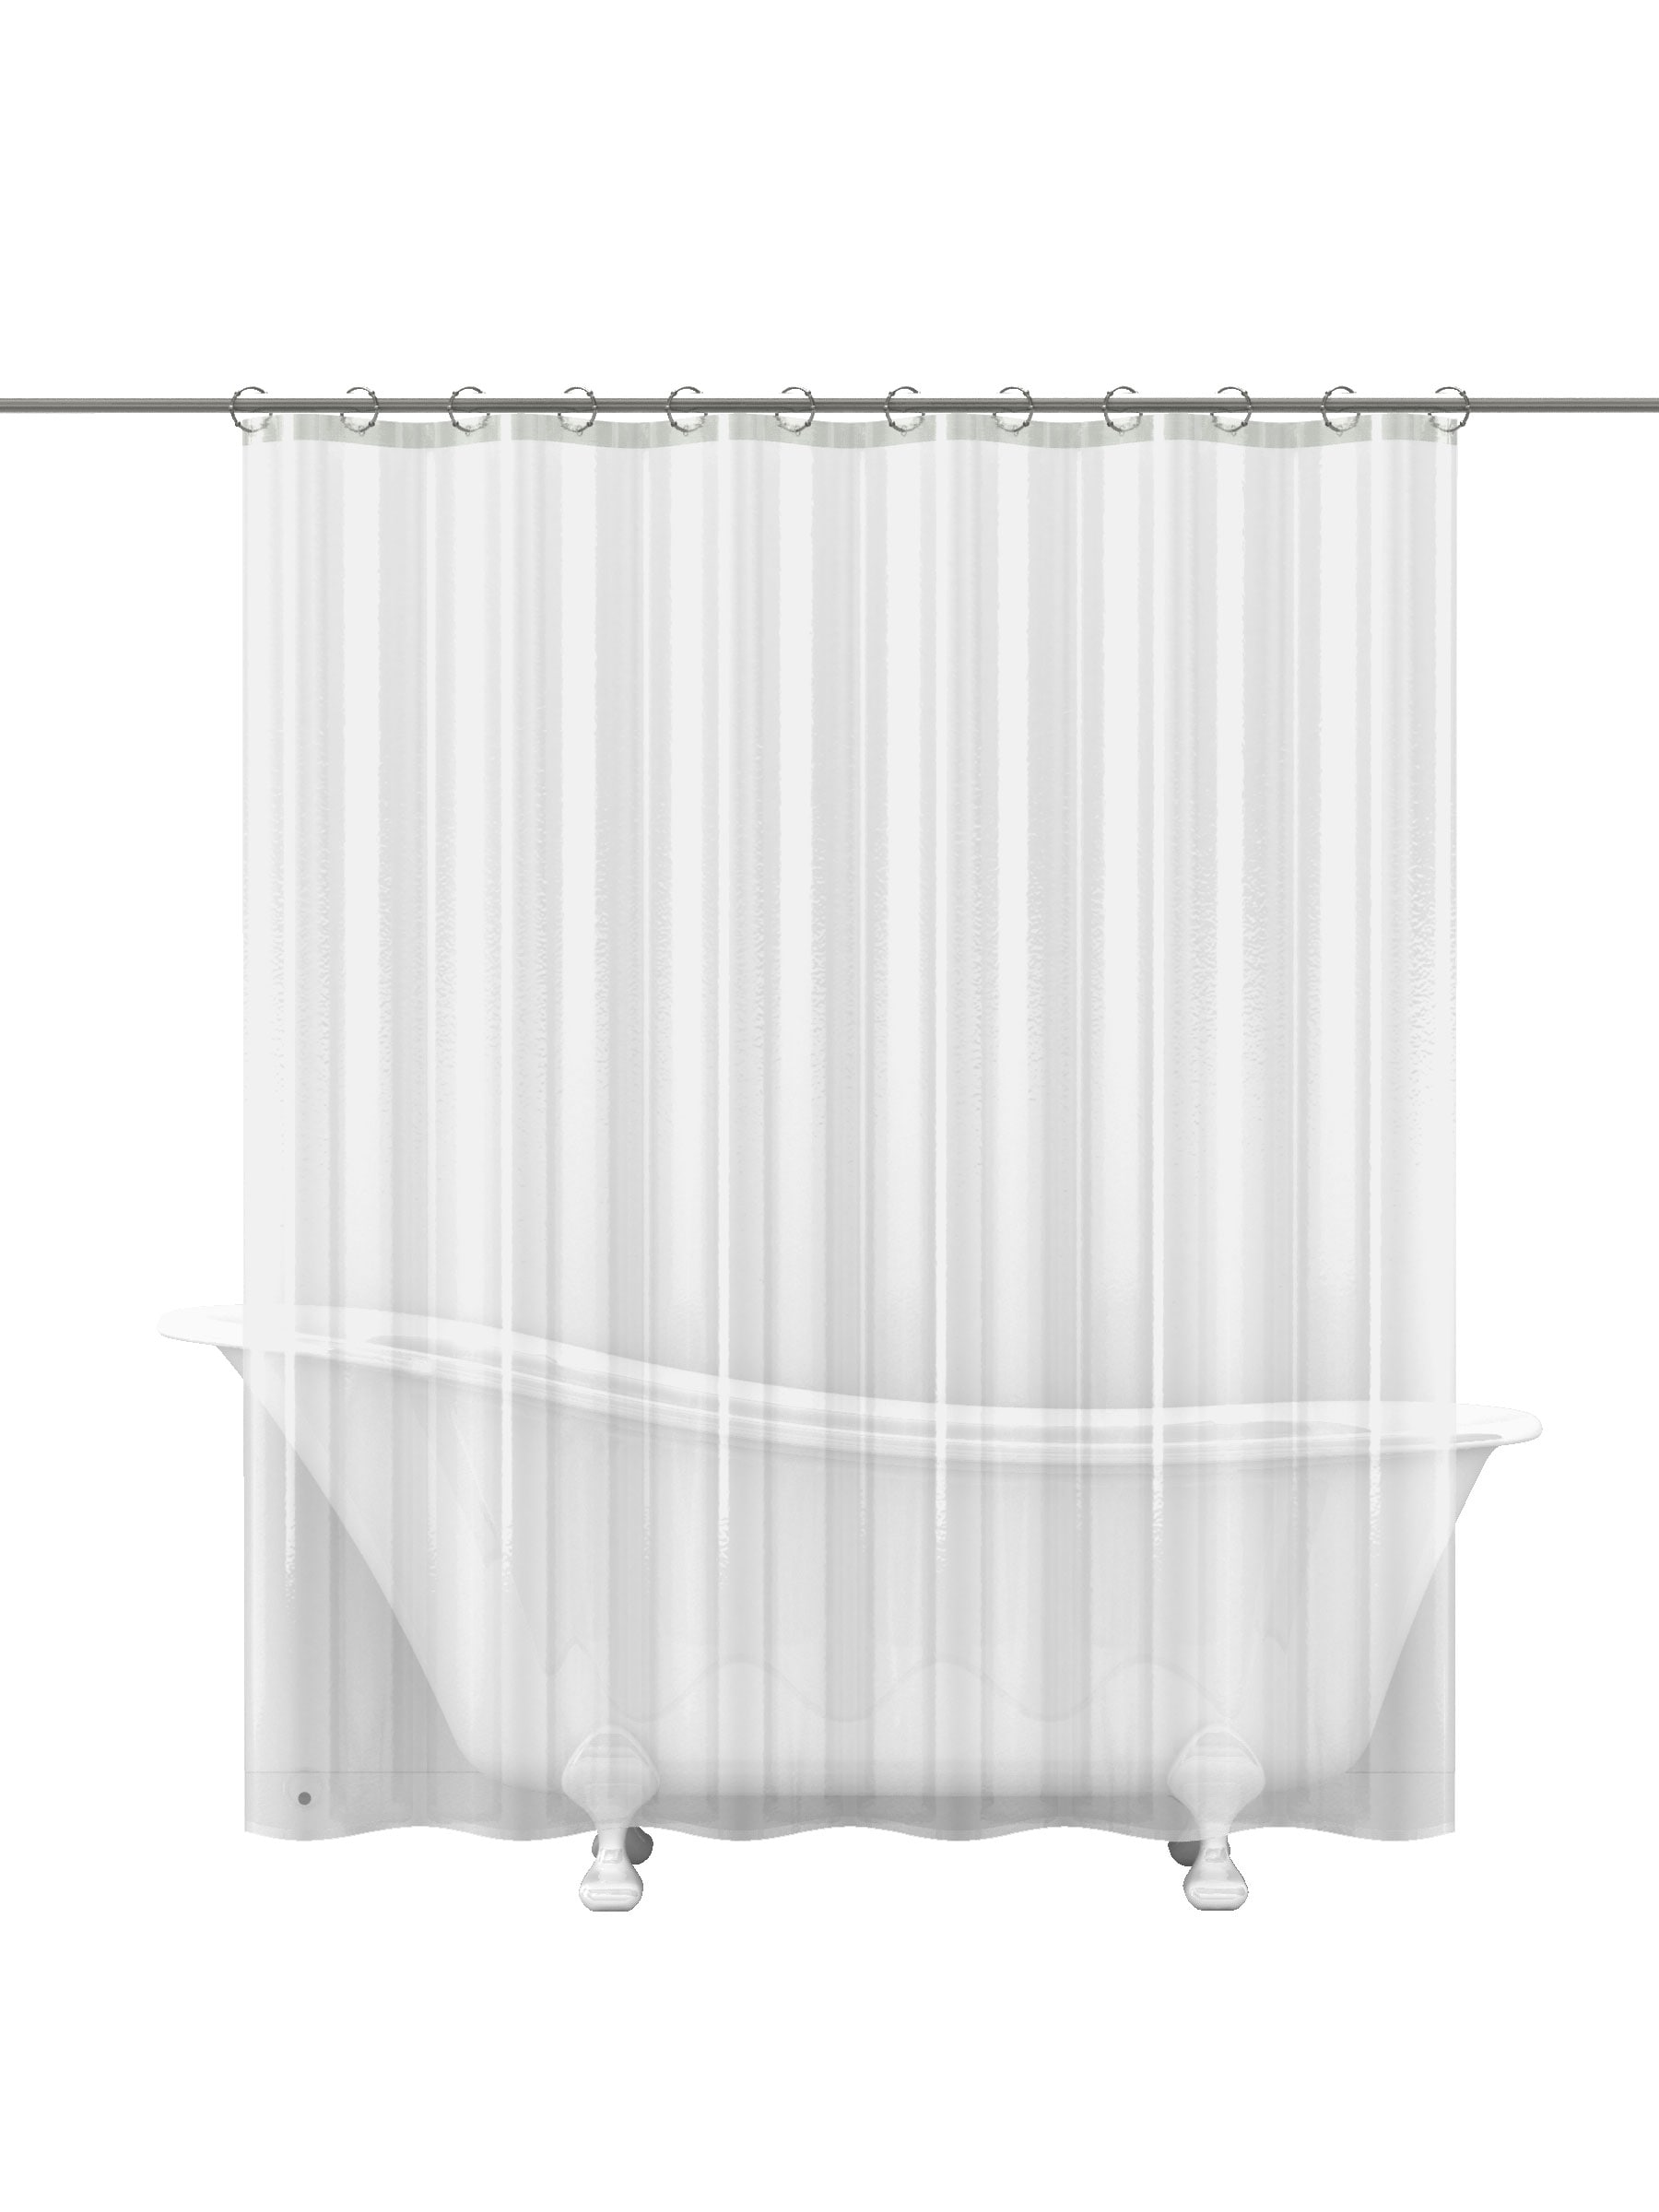 Shower Curtains Liners At Com, What Are Plastic Shower Curtains Made Of